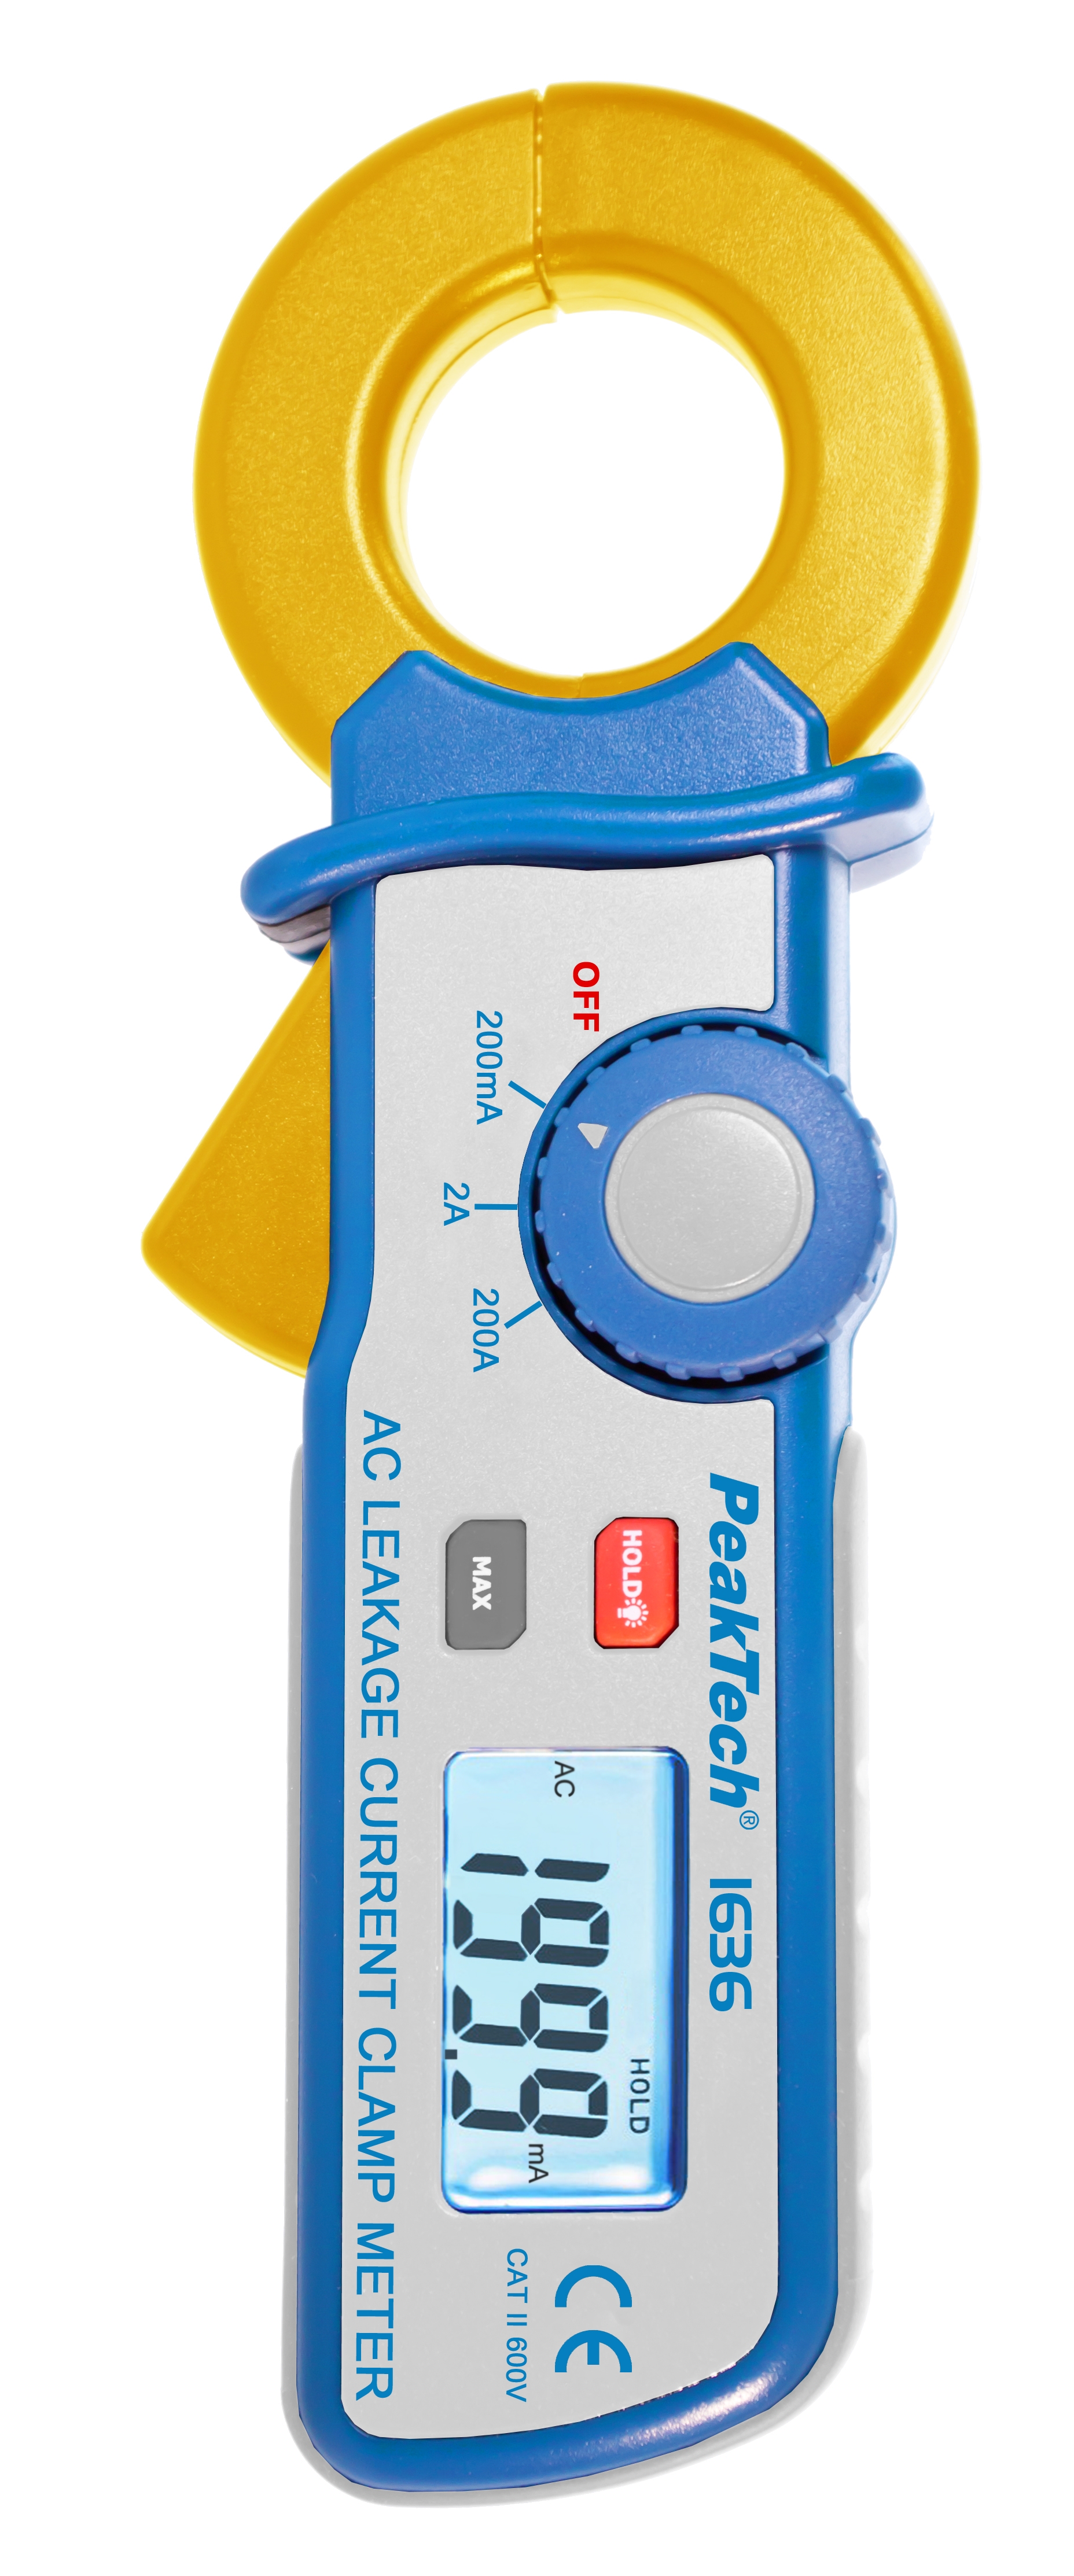 «PeakTech® P 1636» Leakage current clamp with a resolution of 100 µA